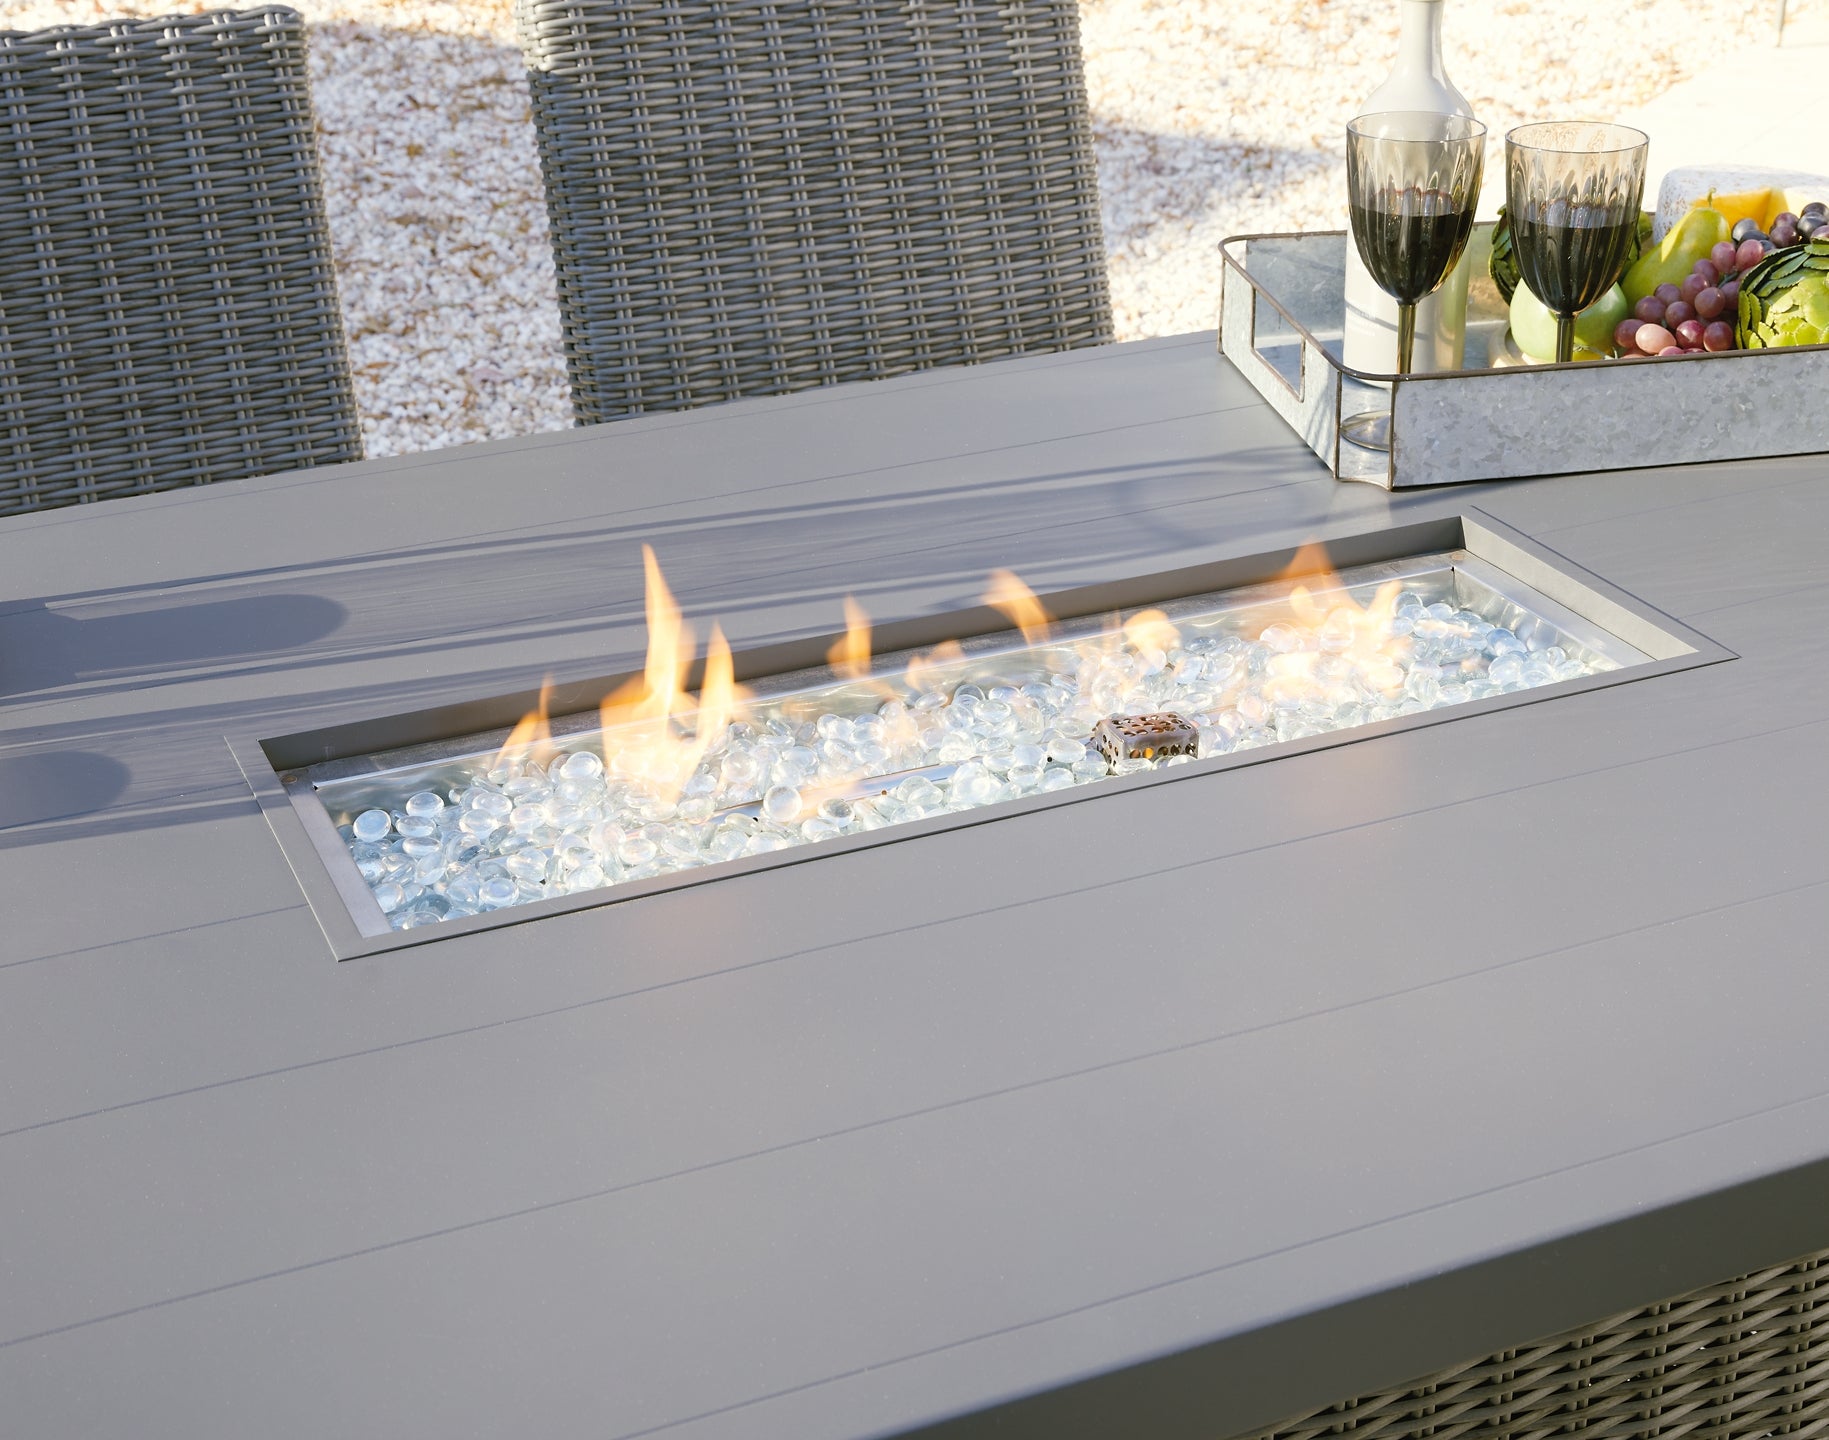 Palazzo Outdoor Bar Table and 4 Barstools Signature Design by Ashley®